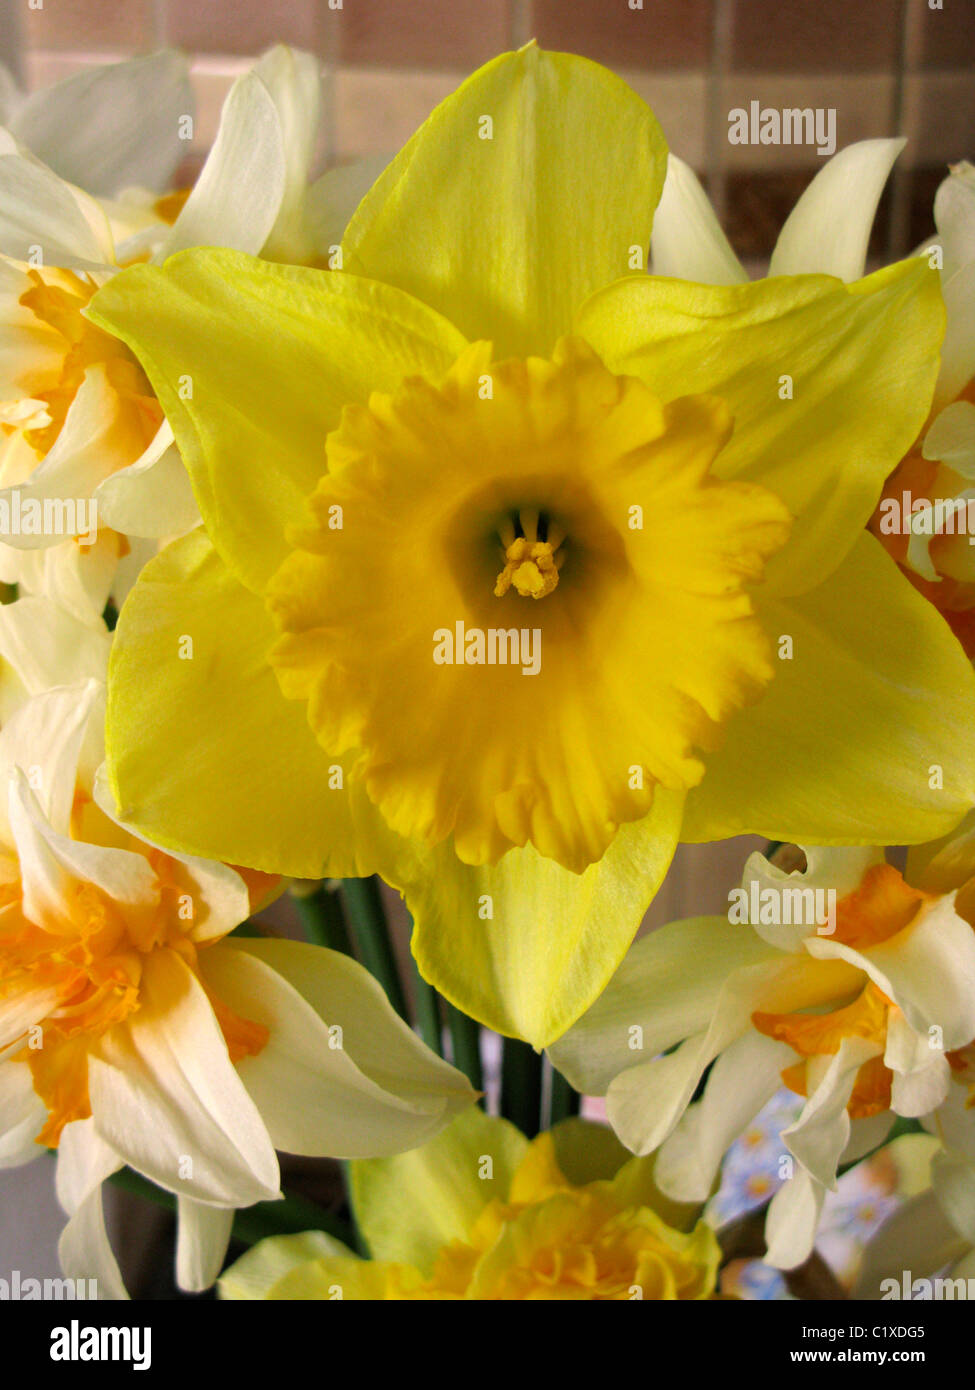 double daffodils with a single yellow daffodil in an arrangement Stock Photo